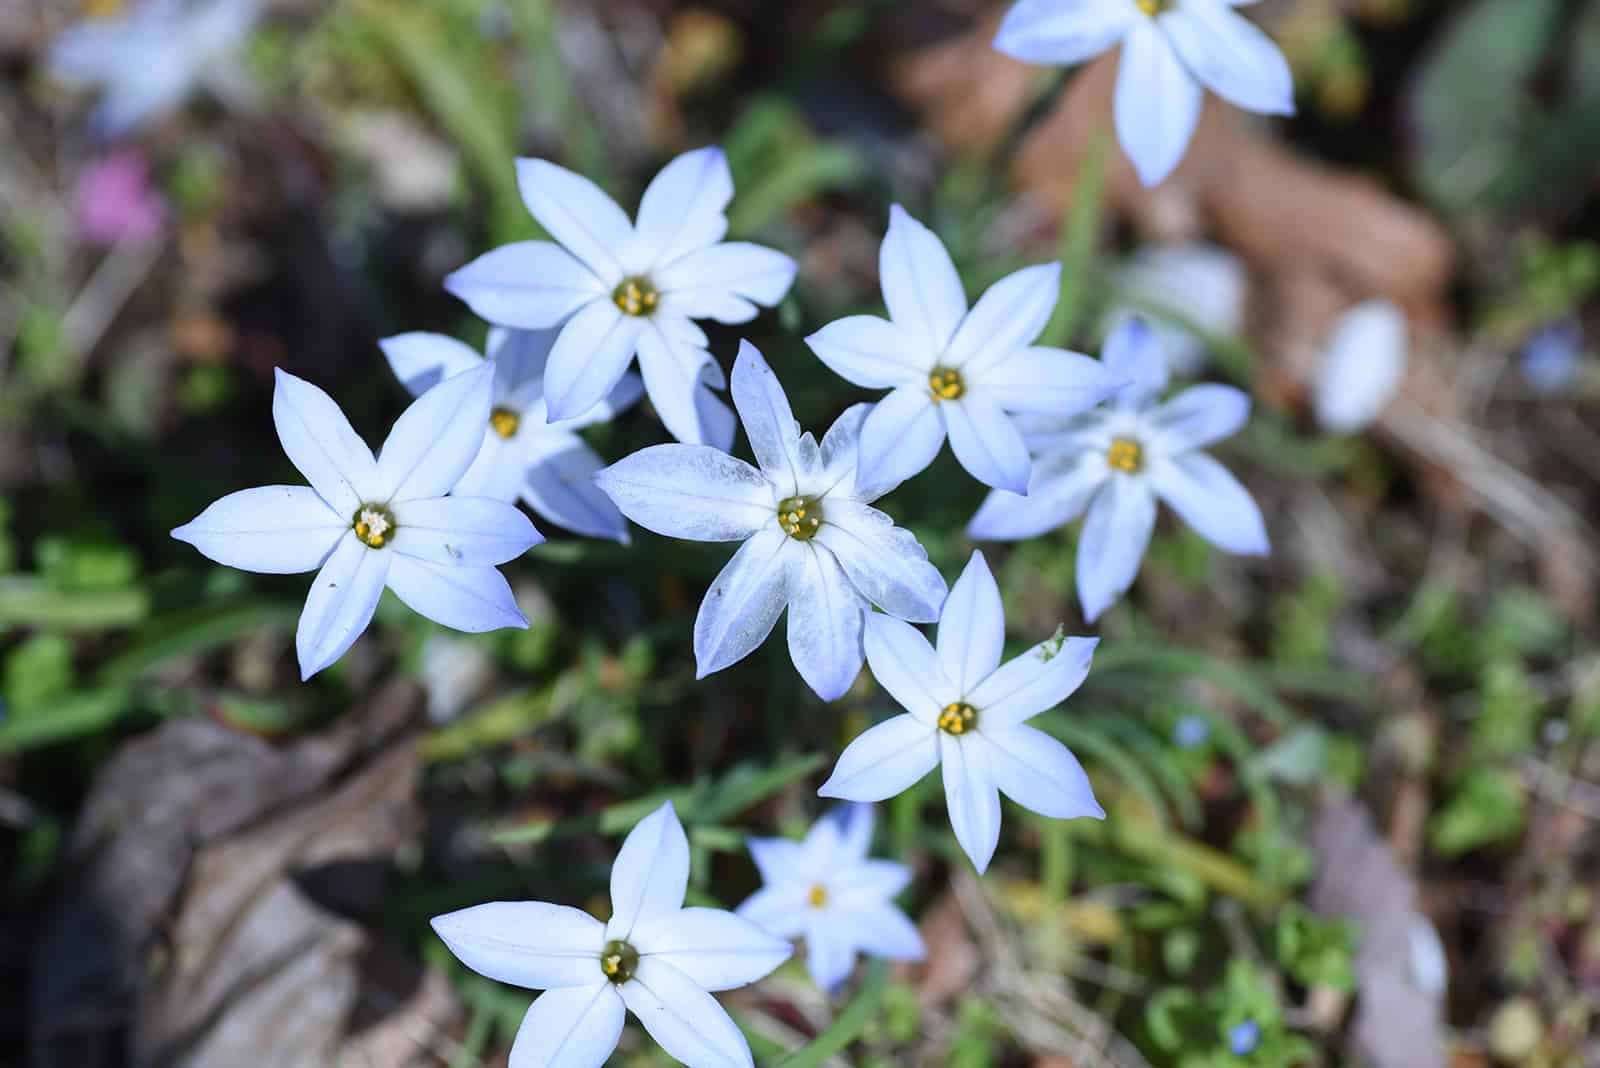 10 Star Shaped Flower Varieties For Every Garden